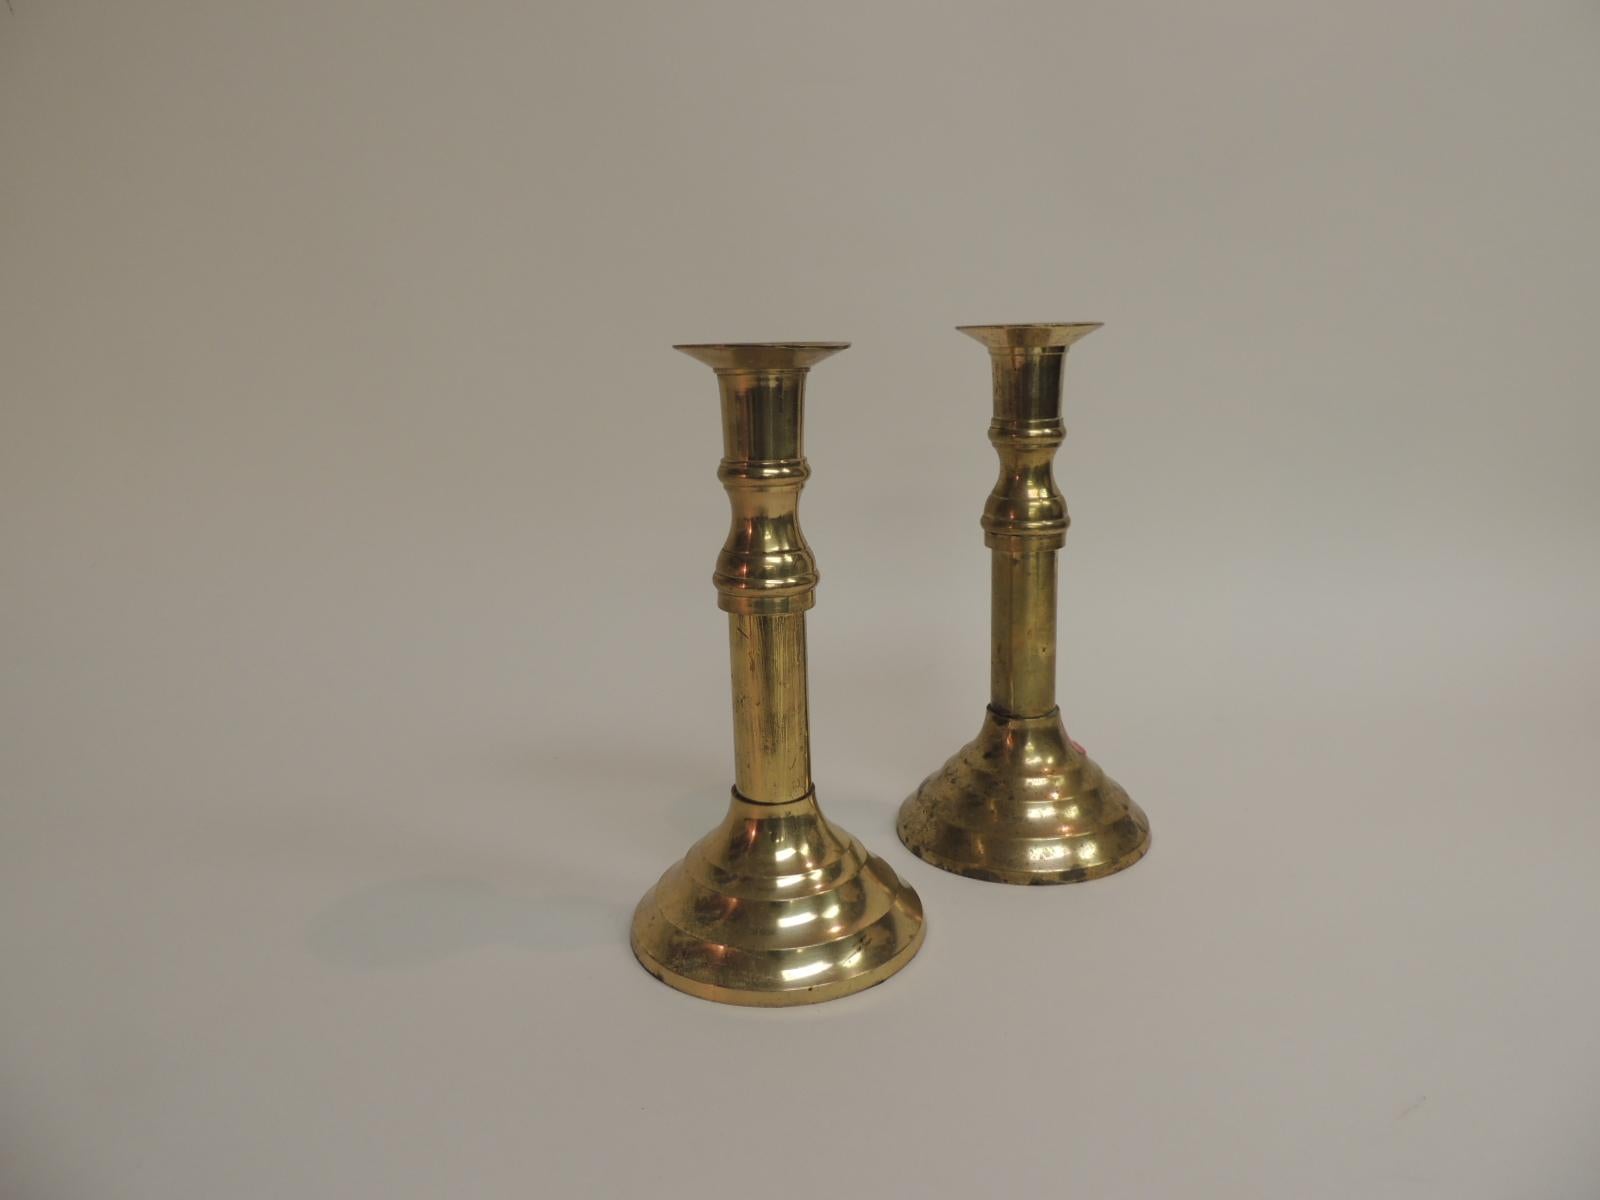 Machine-Made Pair of Traditional Brass Candle Holders